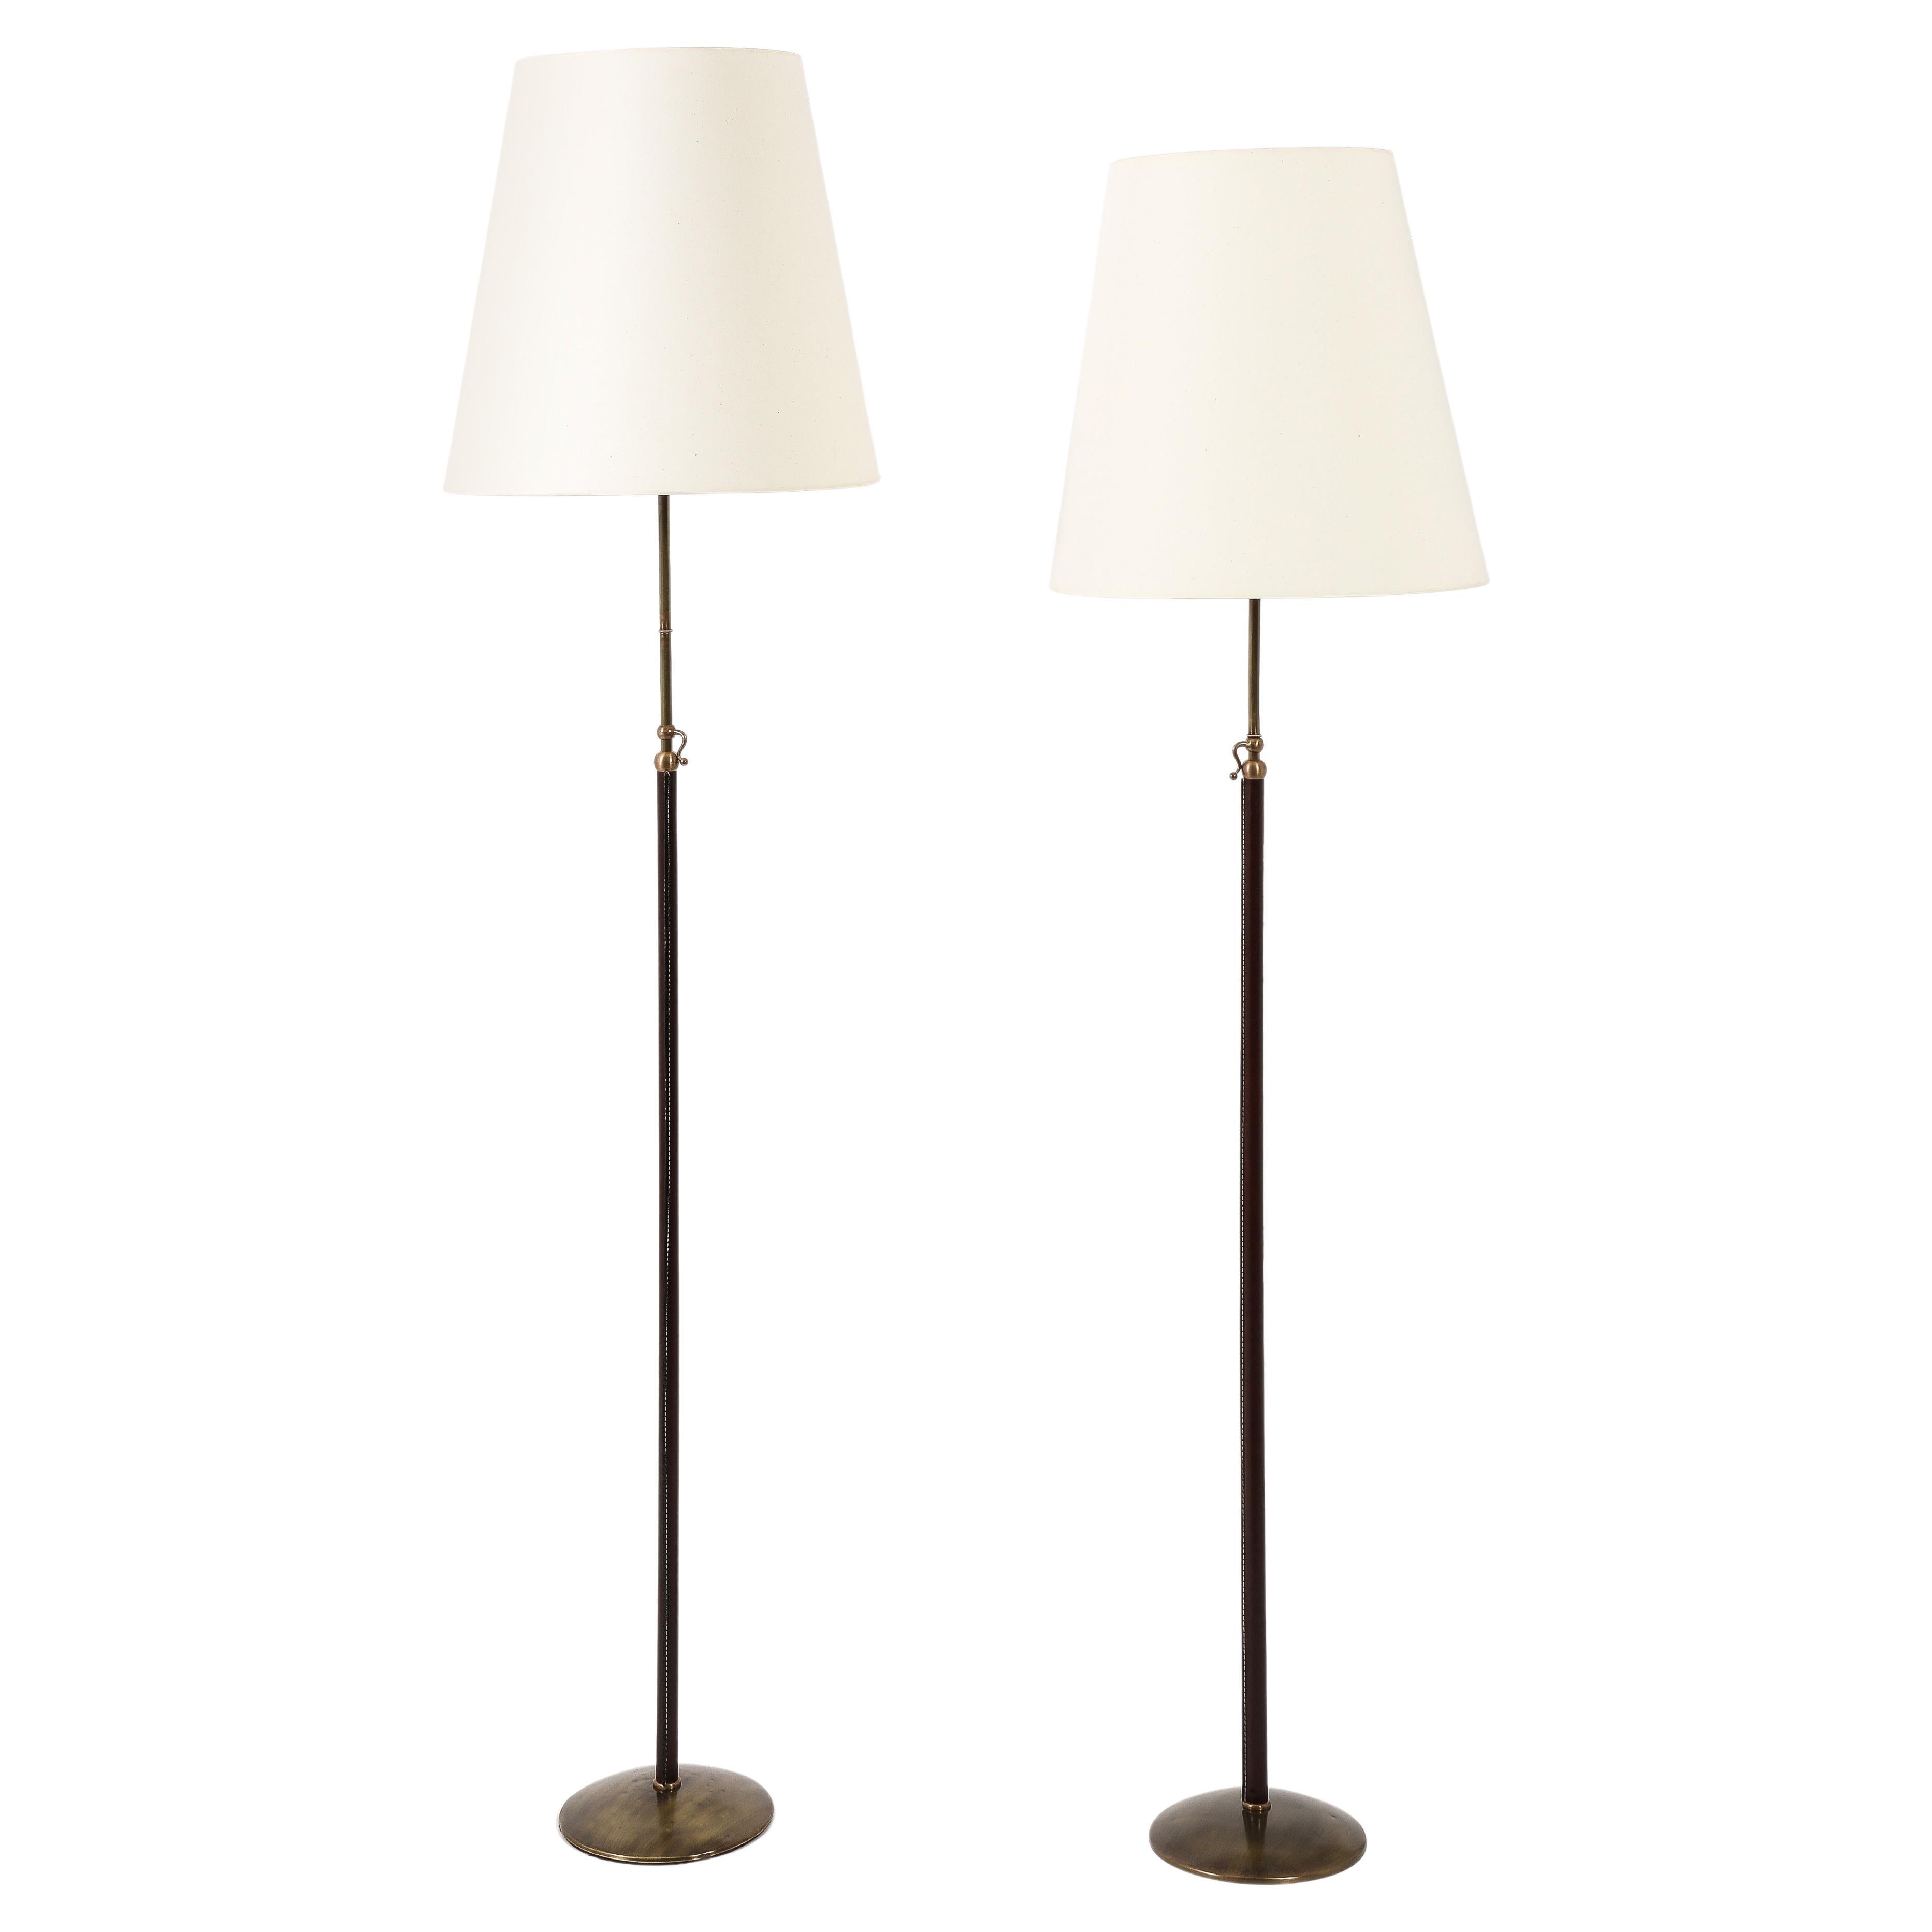 MetalArte Brass & Stitched Brown Leather Floor Lamps, Spain 1960's